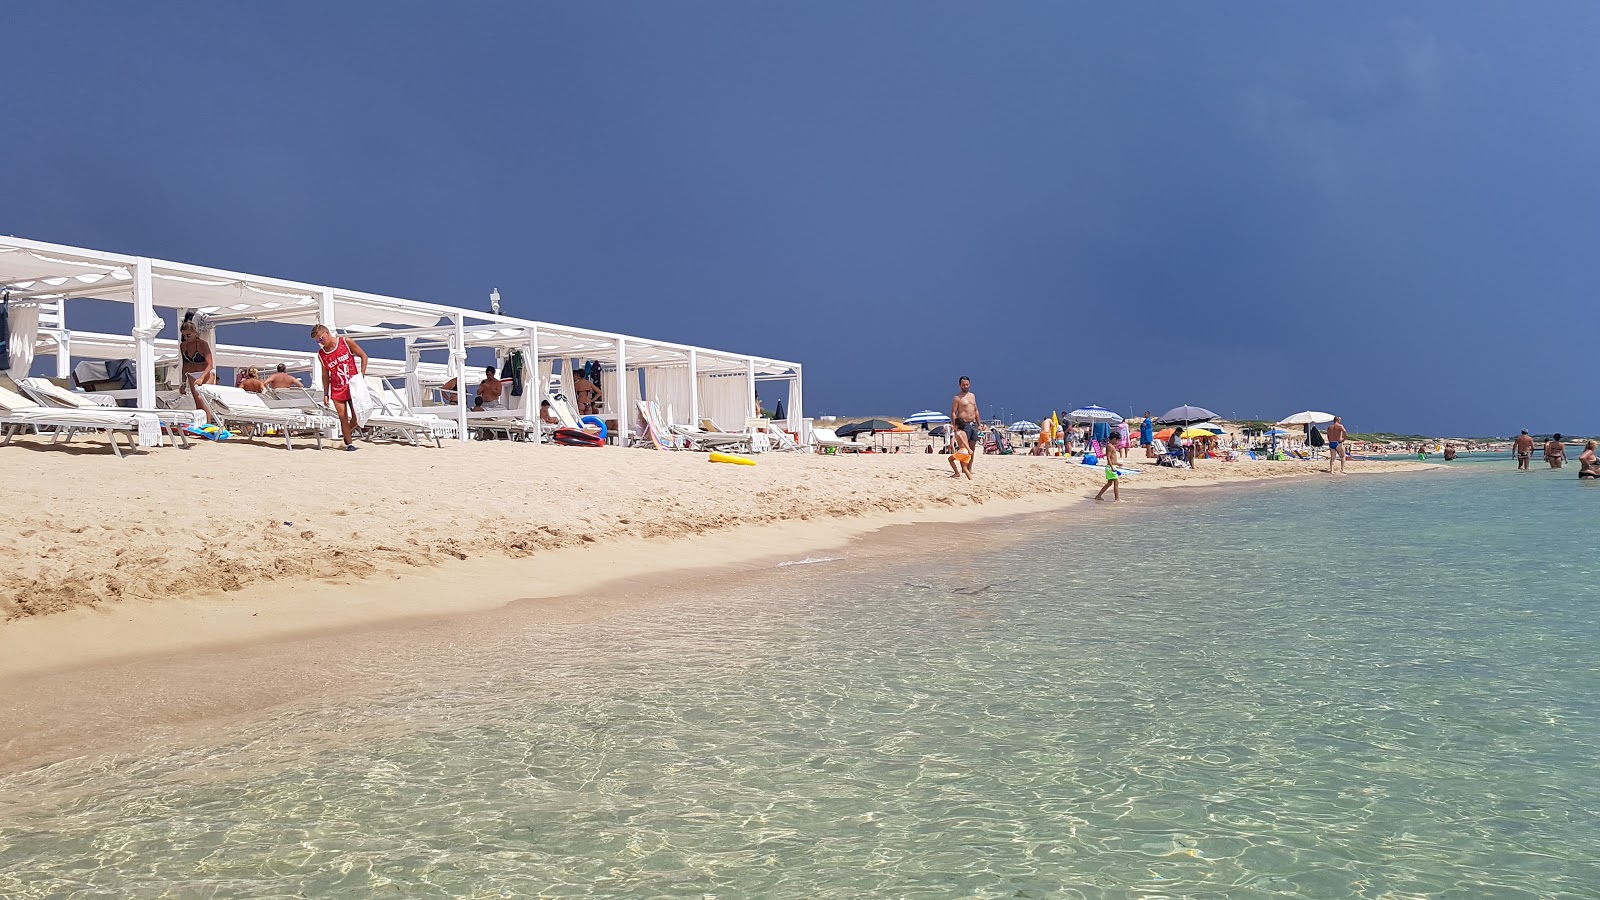 Photo of Spiaggia Di Campomarino - popular place among relax connoisseurs